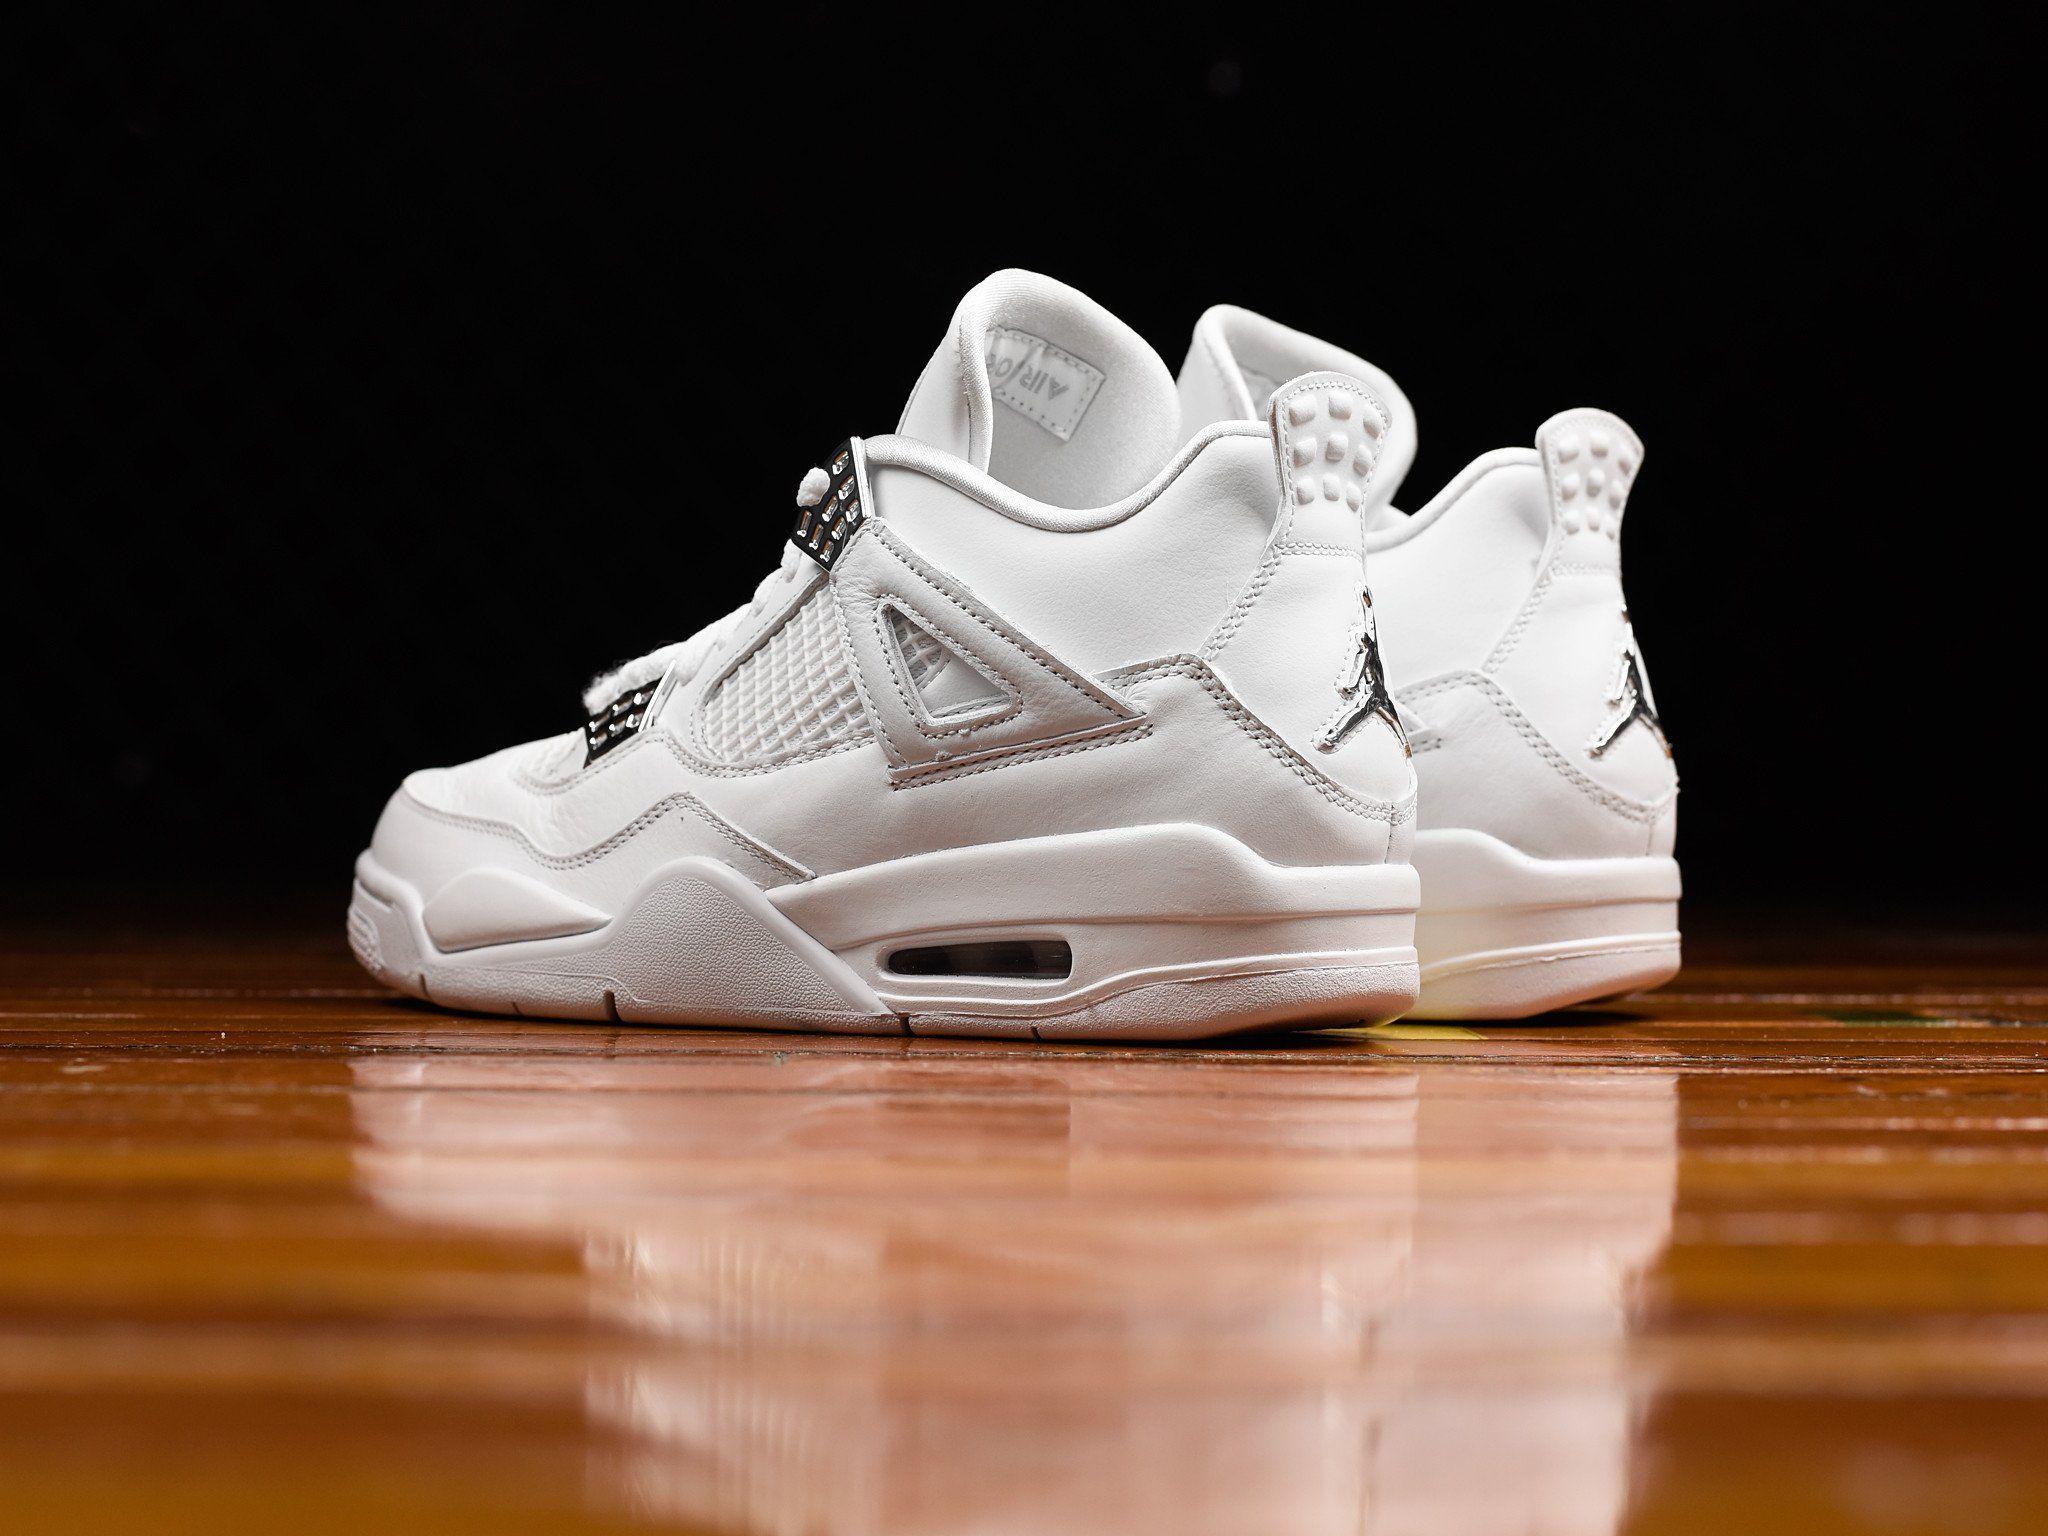 The Air Jordan 4 Pure Money Needs To Be Added To Your Summer Sneaker